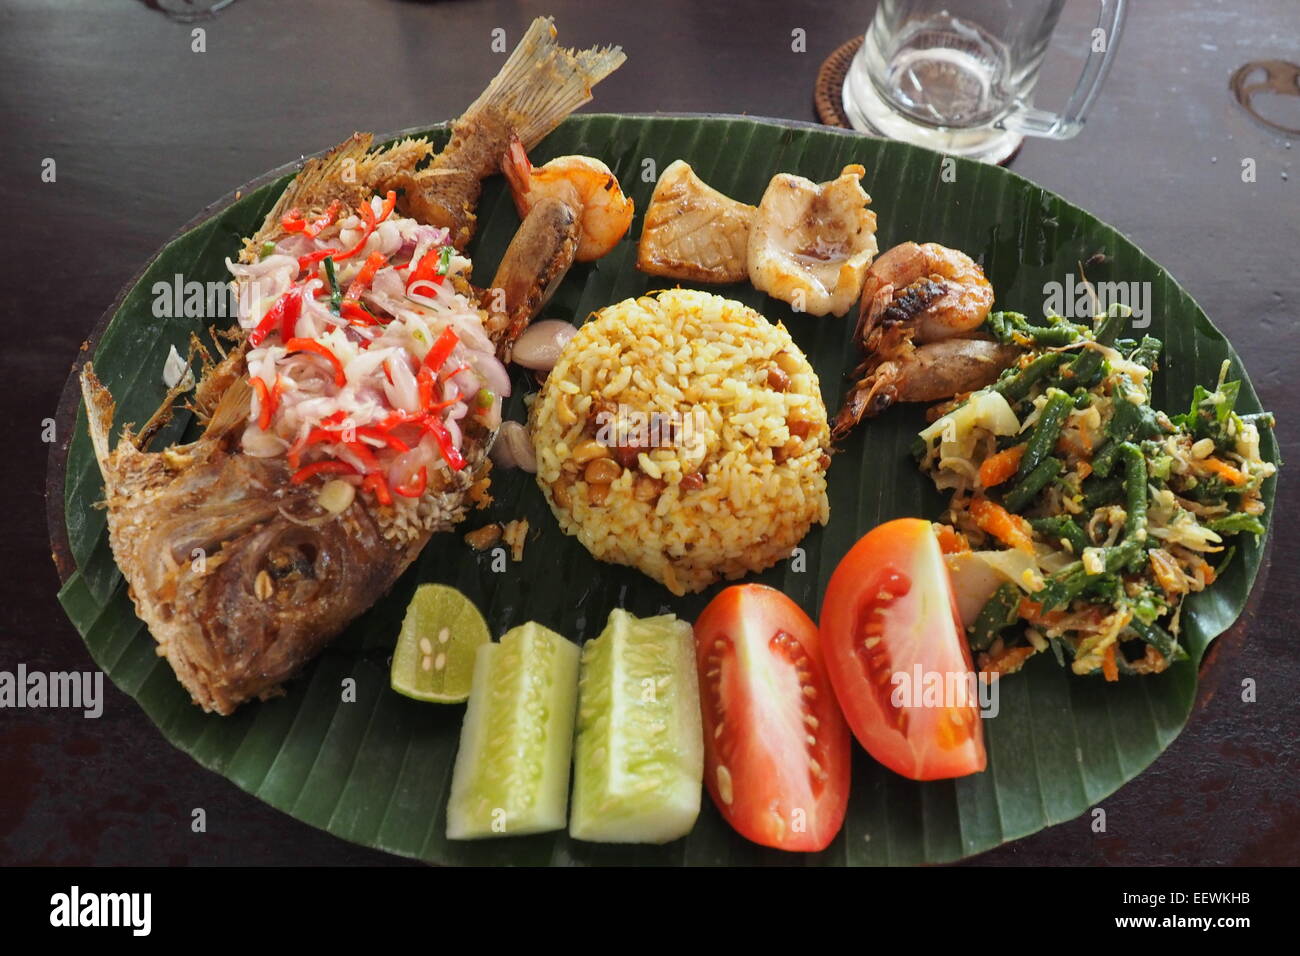 Traditional Balinese food served on a banana leaf. Stock Photo